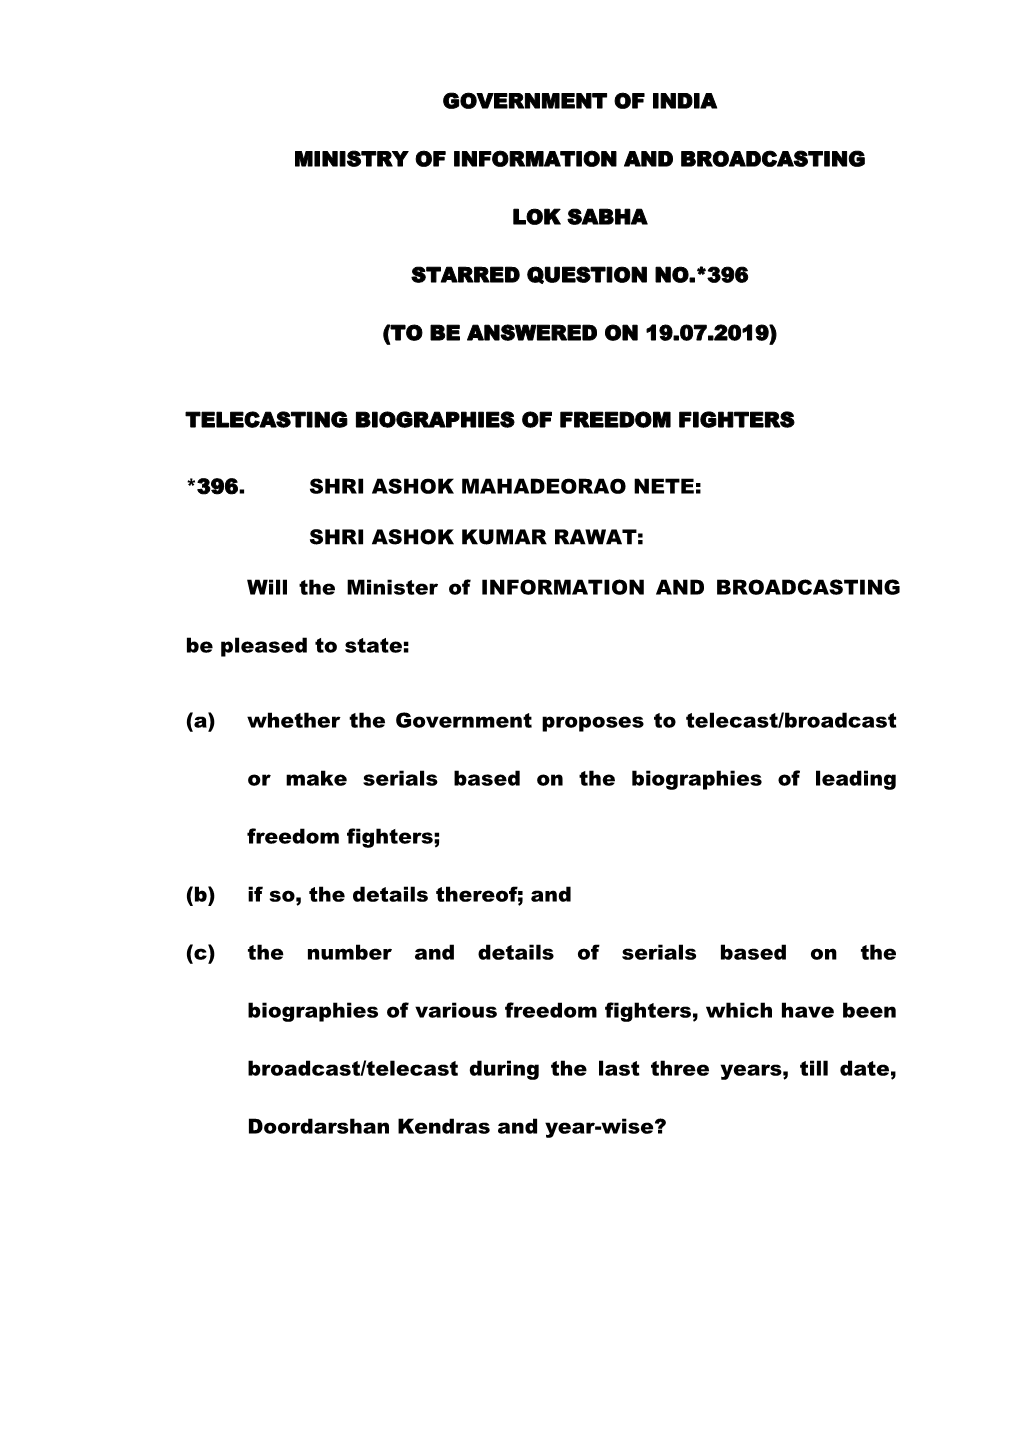 Government of India Ministry of Information and Broadcasting Lok Sabha Starred Question No.*396 (To Be Answered on 19.07.2019) T